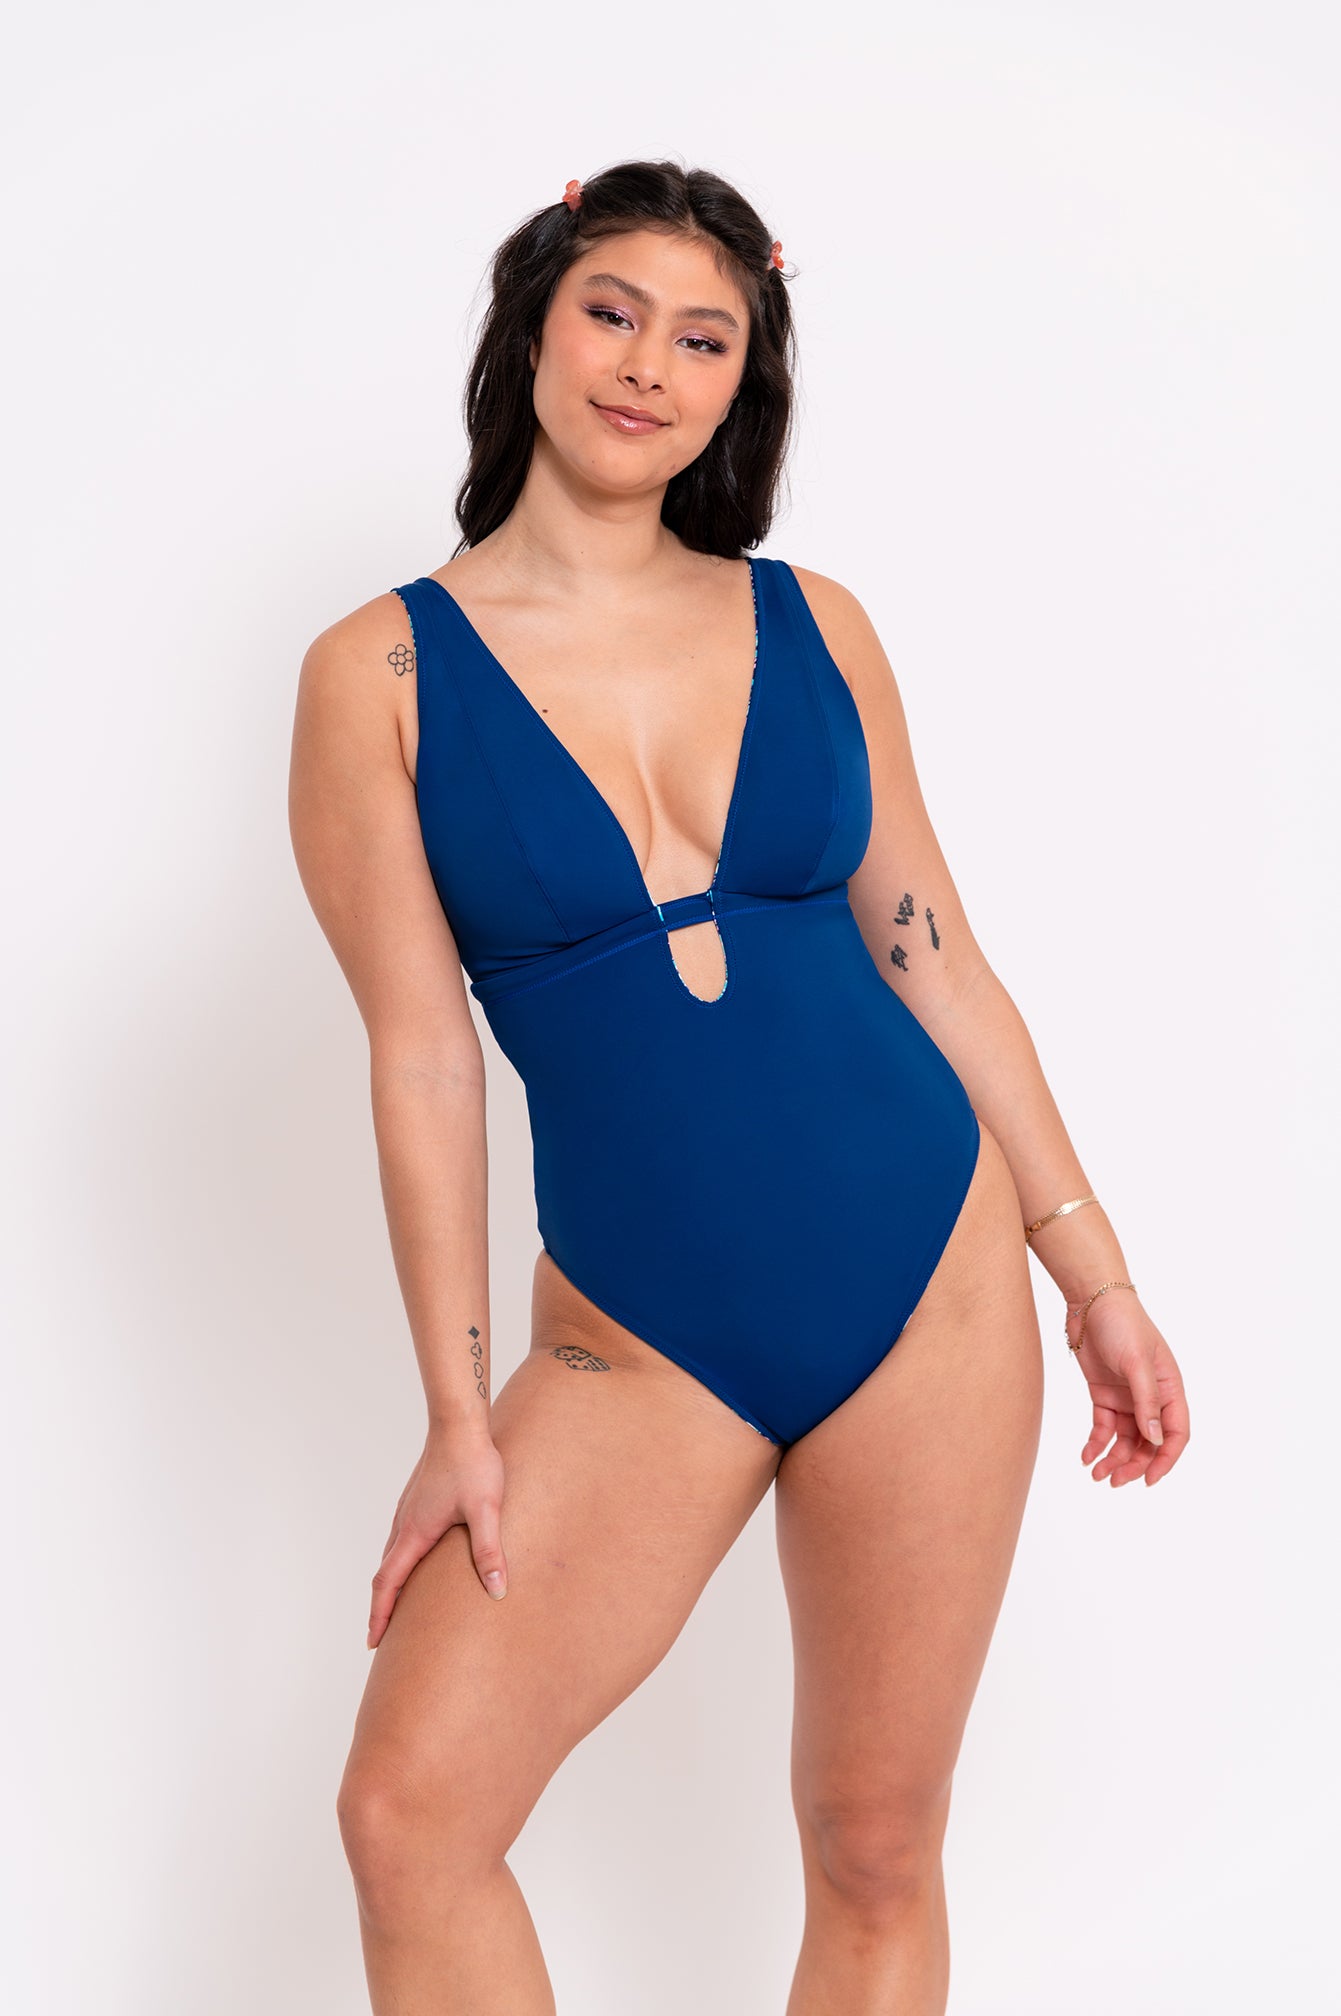 Curvy Kate Mykonos Reversible Non Wired Swimsuit